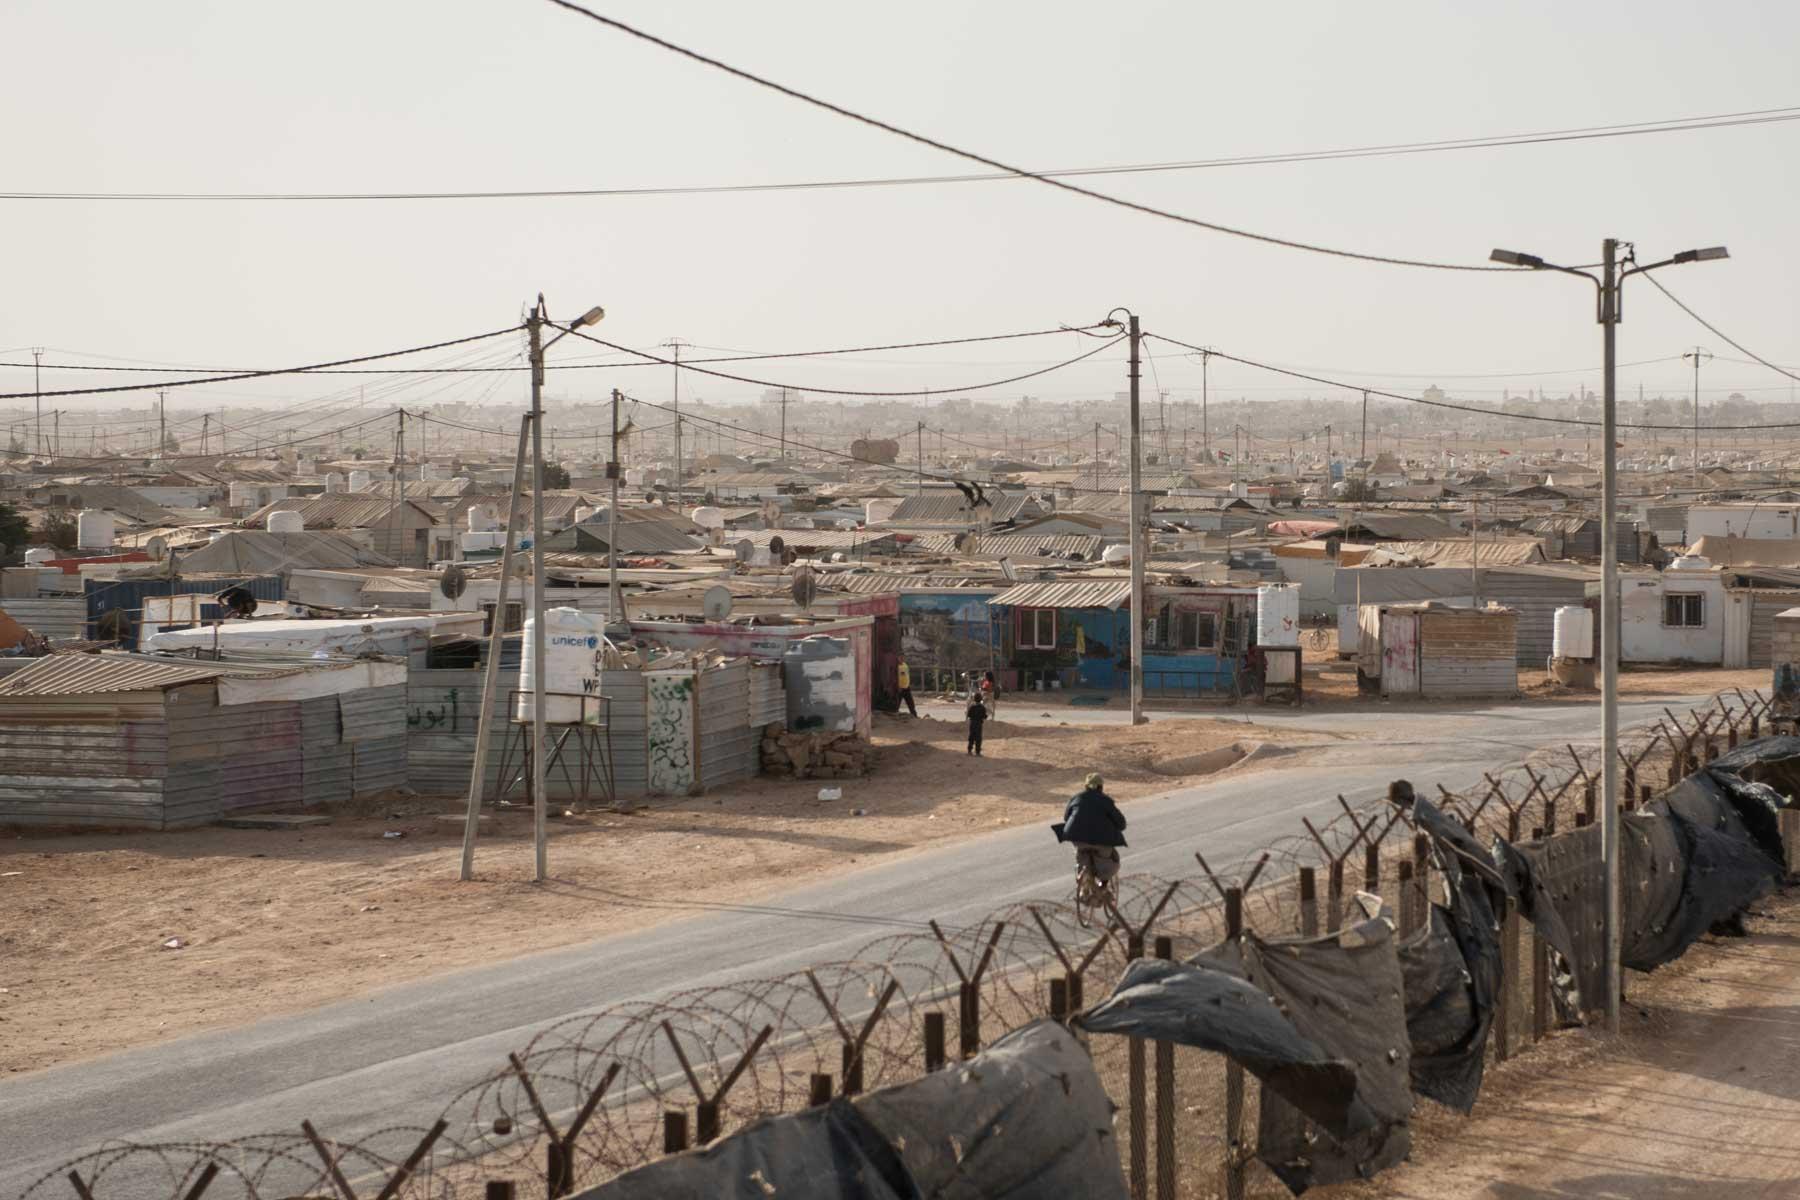 Zaatari with its 80,000 inhabitants is the largest refugee camp in Jordan. It has shops, schools and infrastructure like a small town. Photo: DCA/ Christian Jepsen